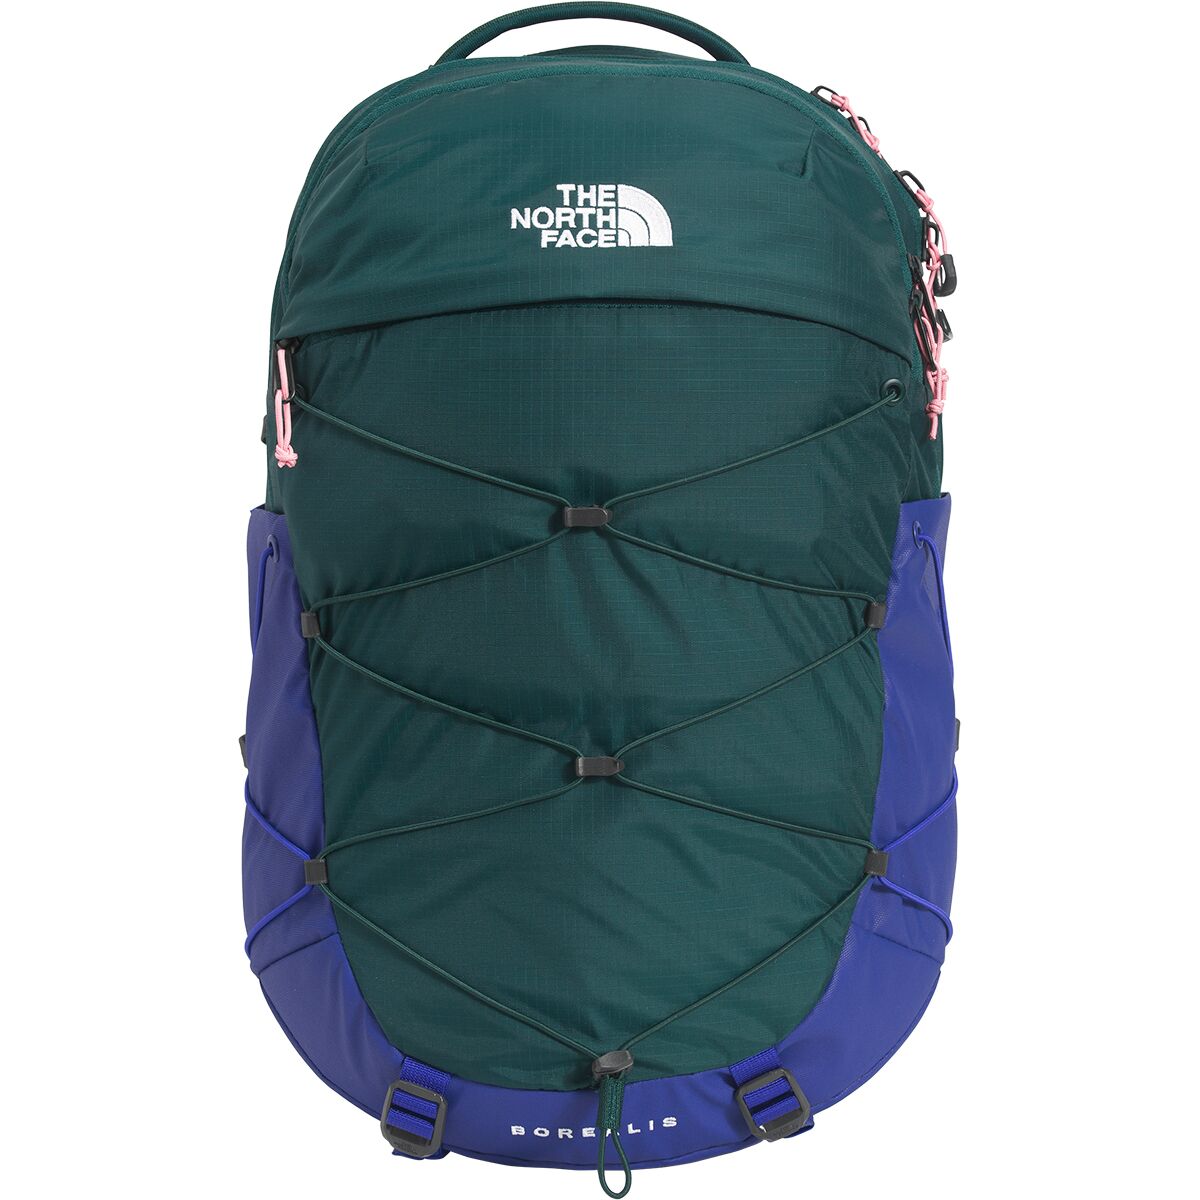 The North Face Borealis 27L Backpack - Women's - Accessories